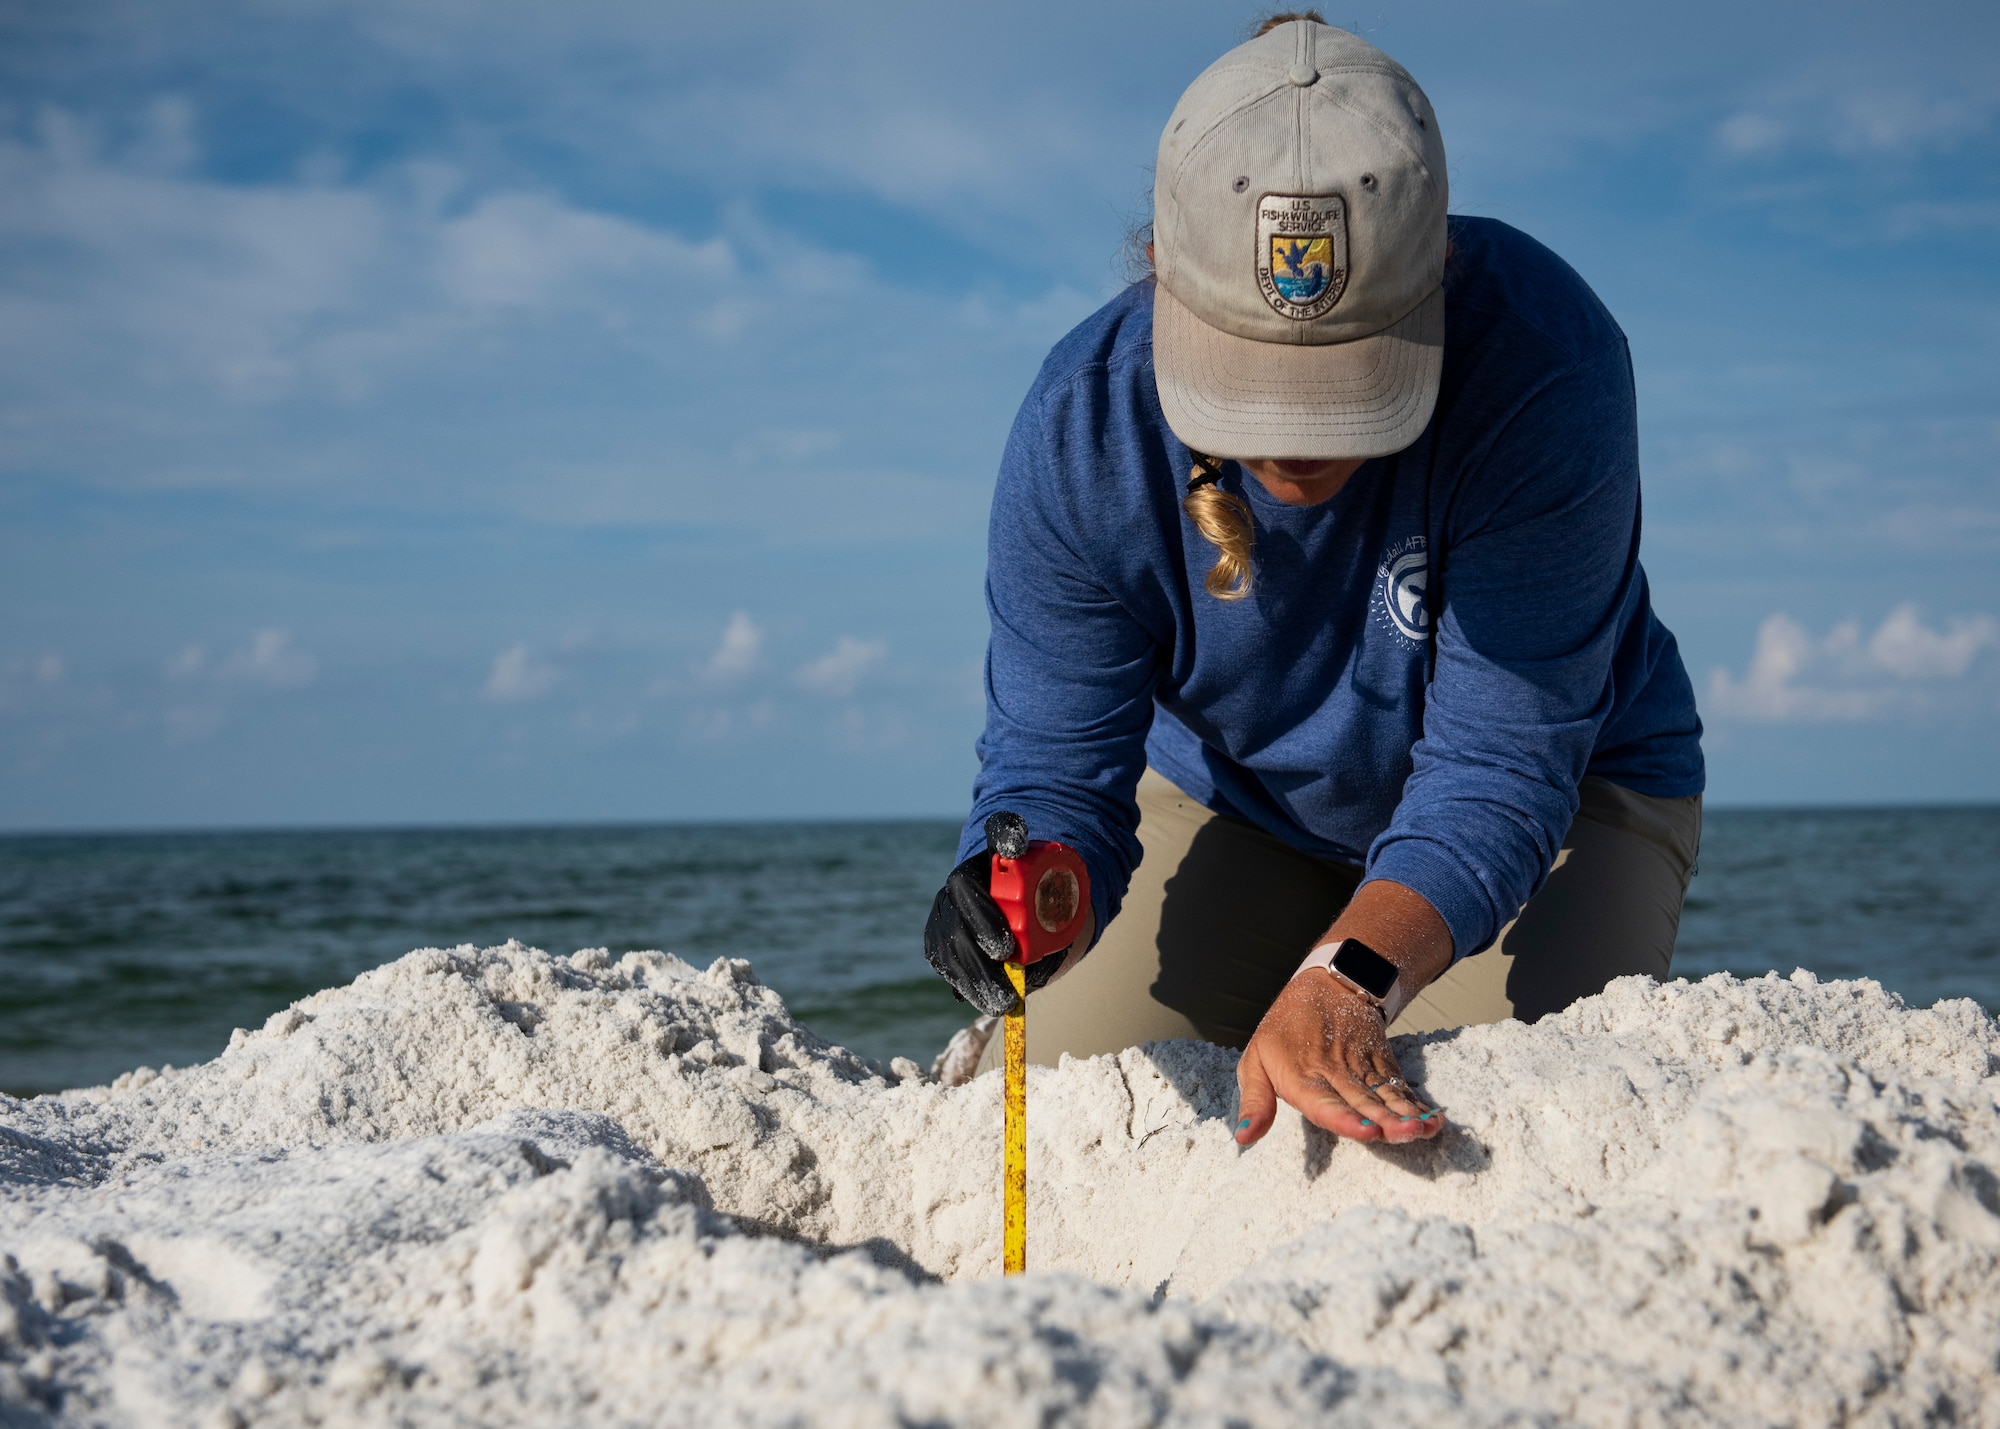 Danielle Bumgardner, U.S. Fish and Wildlife Services biologist, measures the depth of a sea turtle nest on the beach at Tyndall Air Force Base, Florida, June 5, 2019.